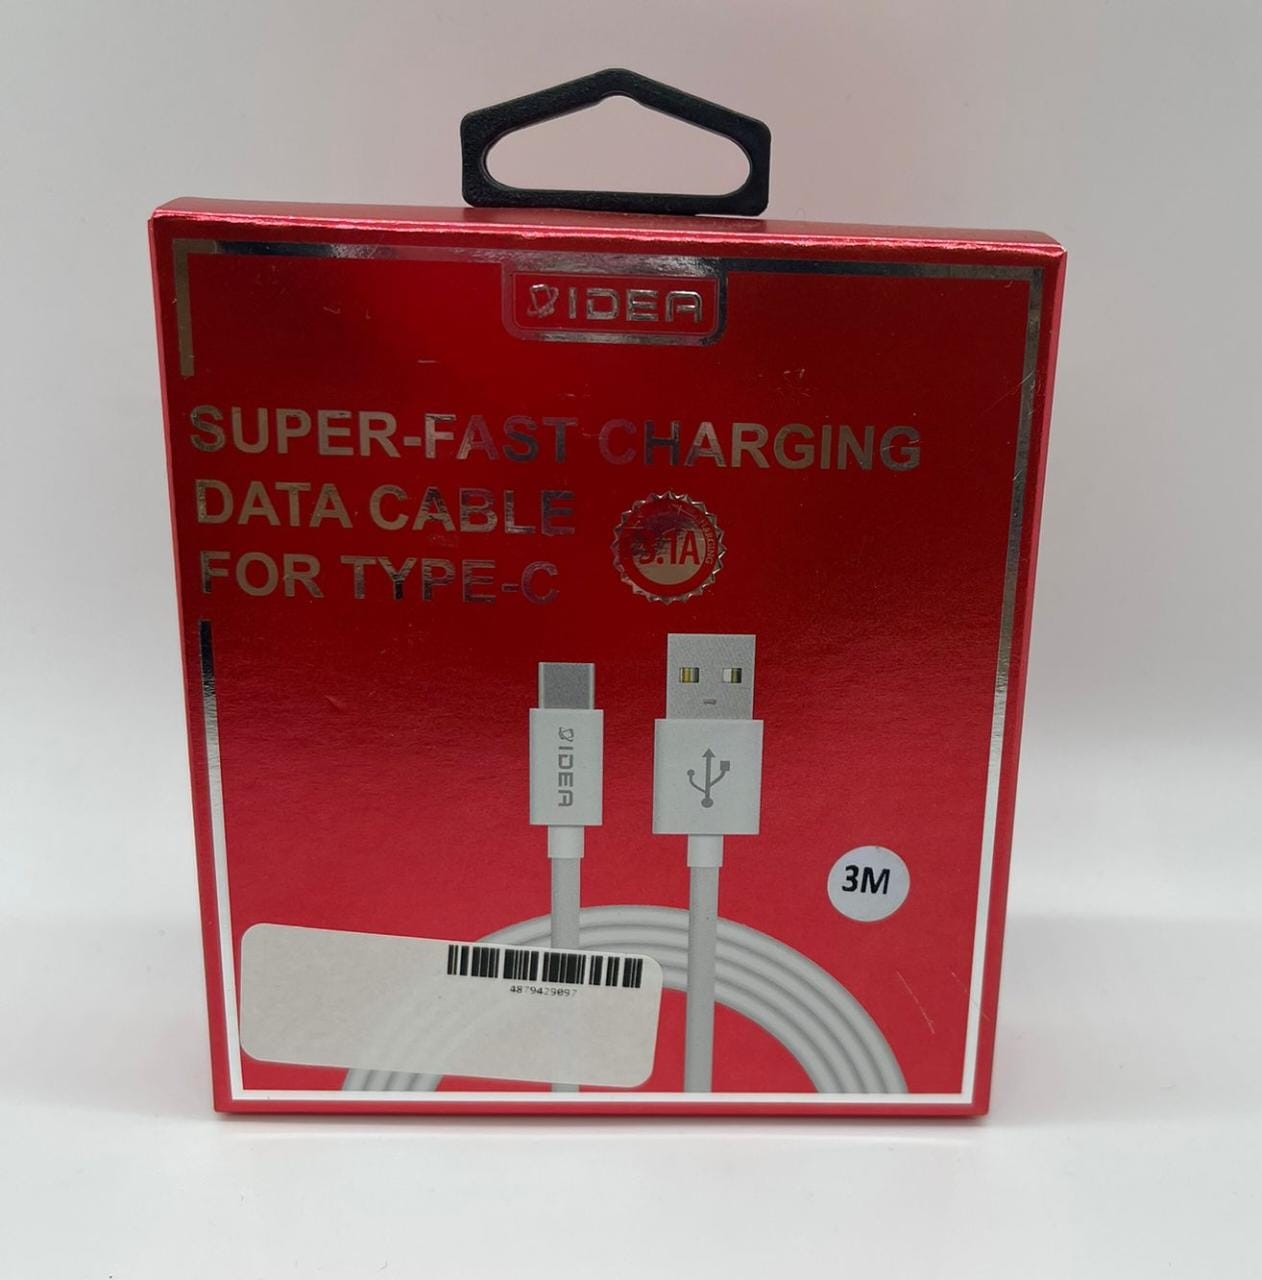 Super- Fast Charging Data Cable For Type-c 3m